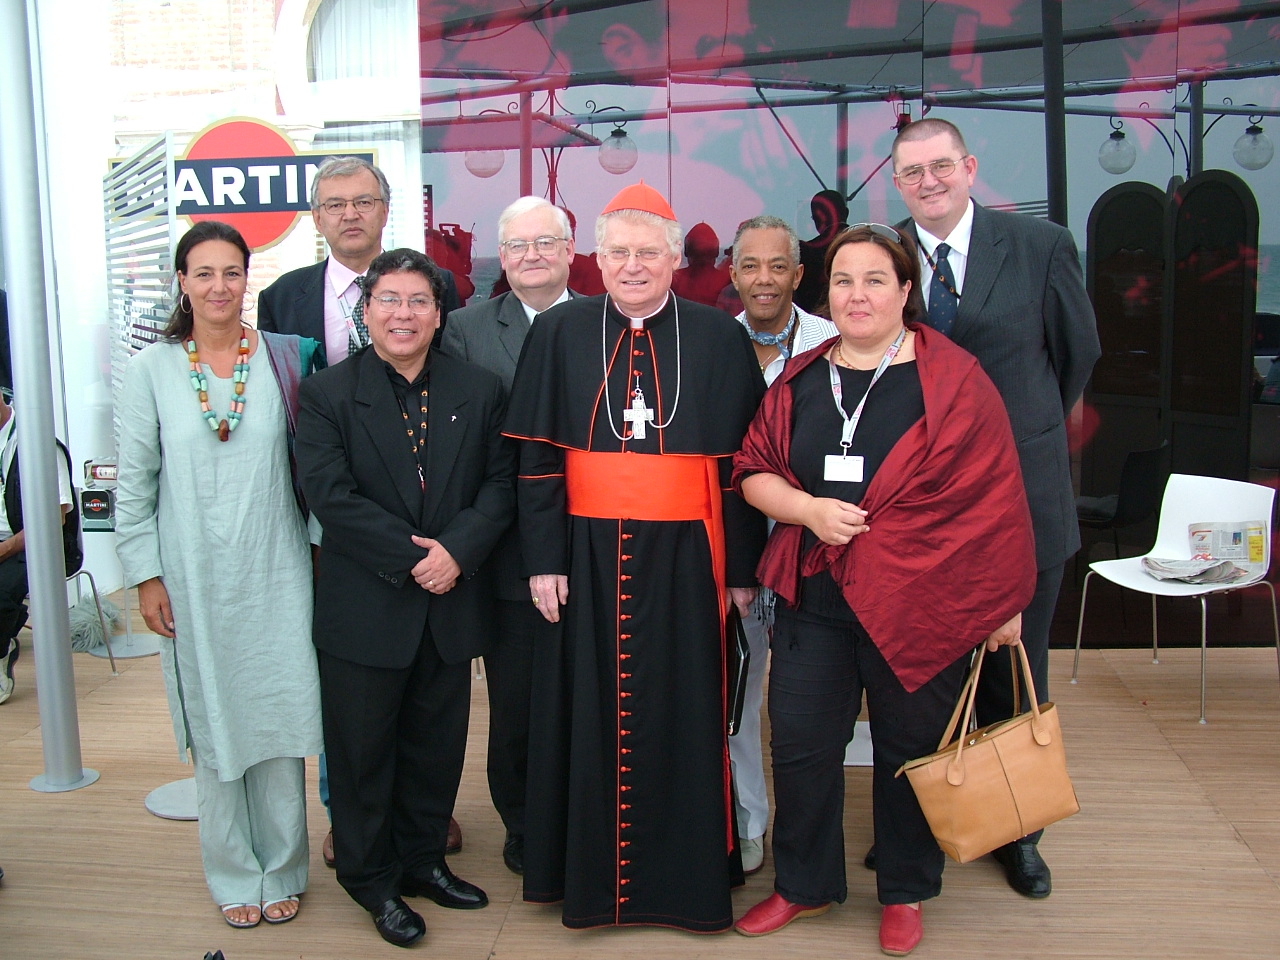 Haskell Vaughn Anderson III with other SIGNIS Jurors and the Prelate of Venice, Italy at the Venice International Film Festival, 2005